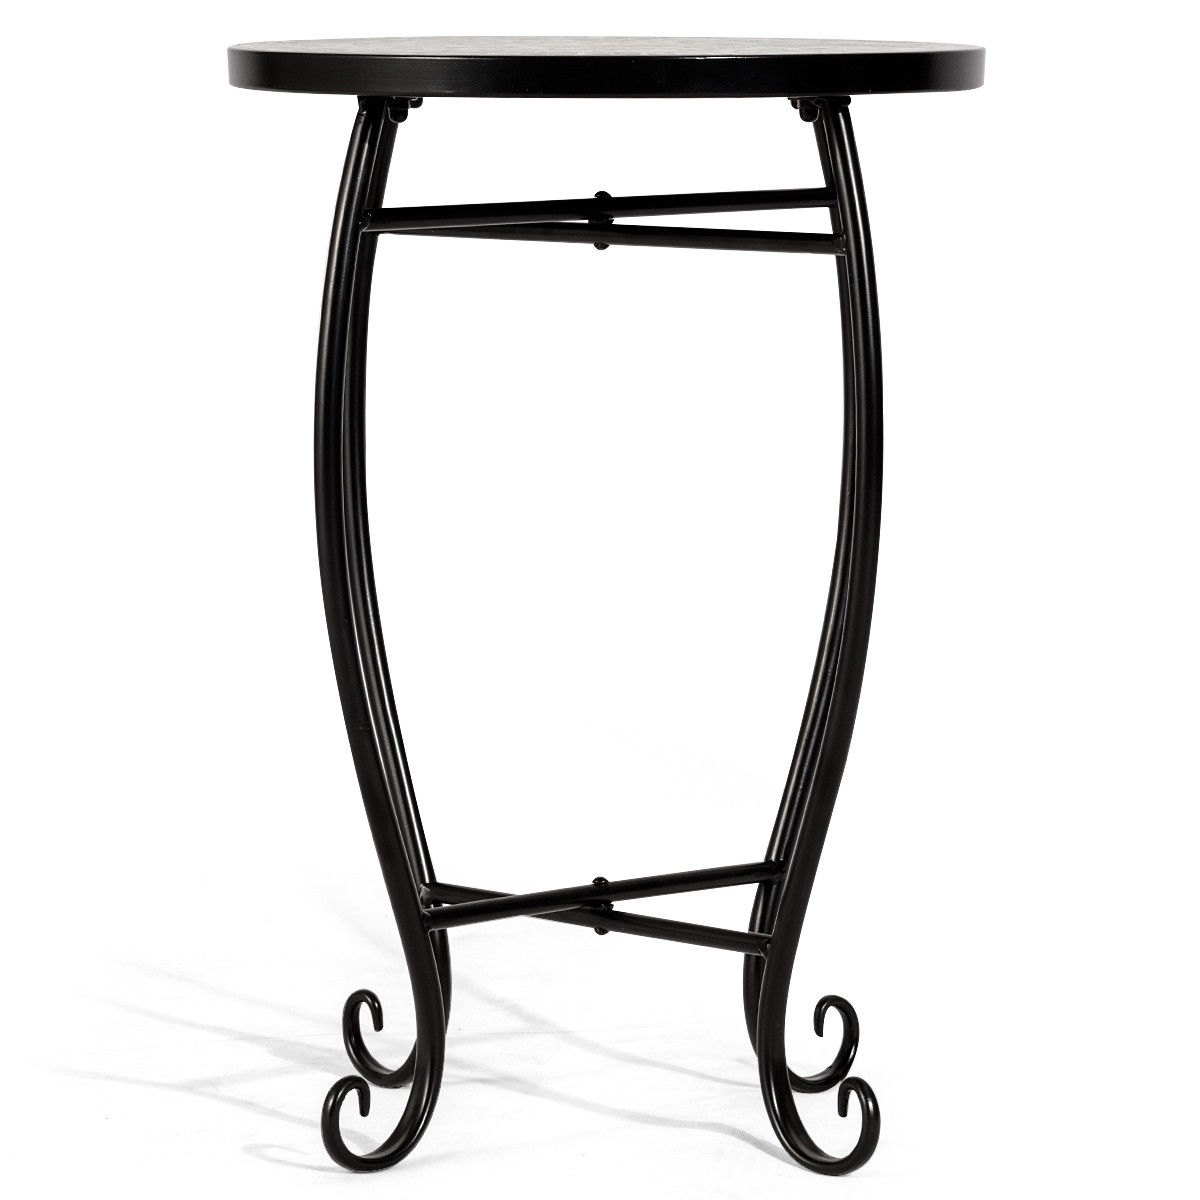 way outdoor indoor accent table plant stand scheme solar metal garden steel green glass agate mirrored lamp tables mcm side reading apartment decor cherry wood end with drawer